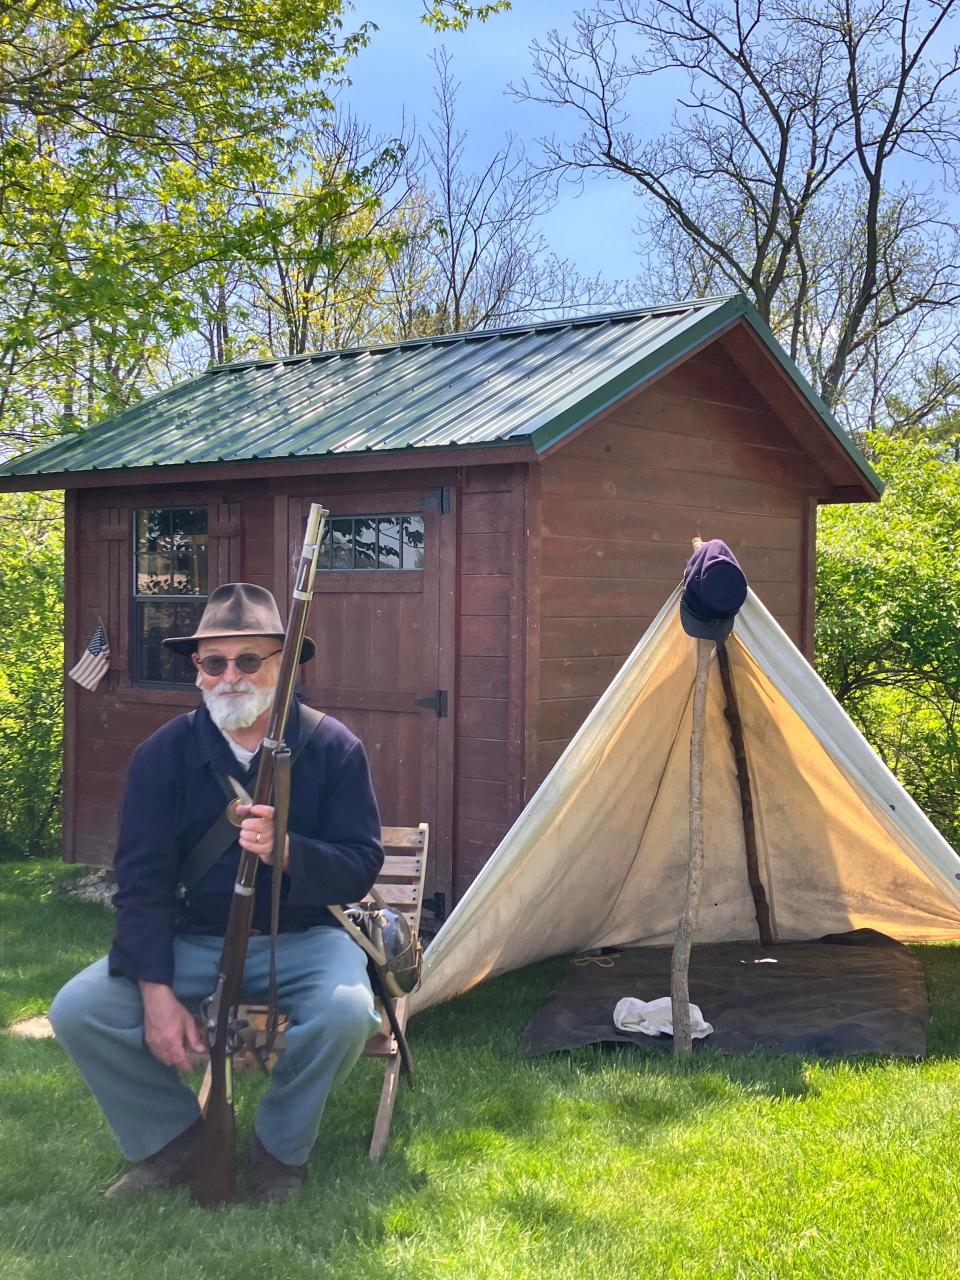 John Cauvel, who is one of the historians who shares knowledge of the Civil War during Cabin at Willow Hollow History Days, sits in front of a tent on the grounds.